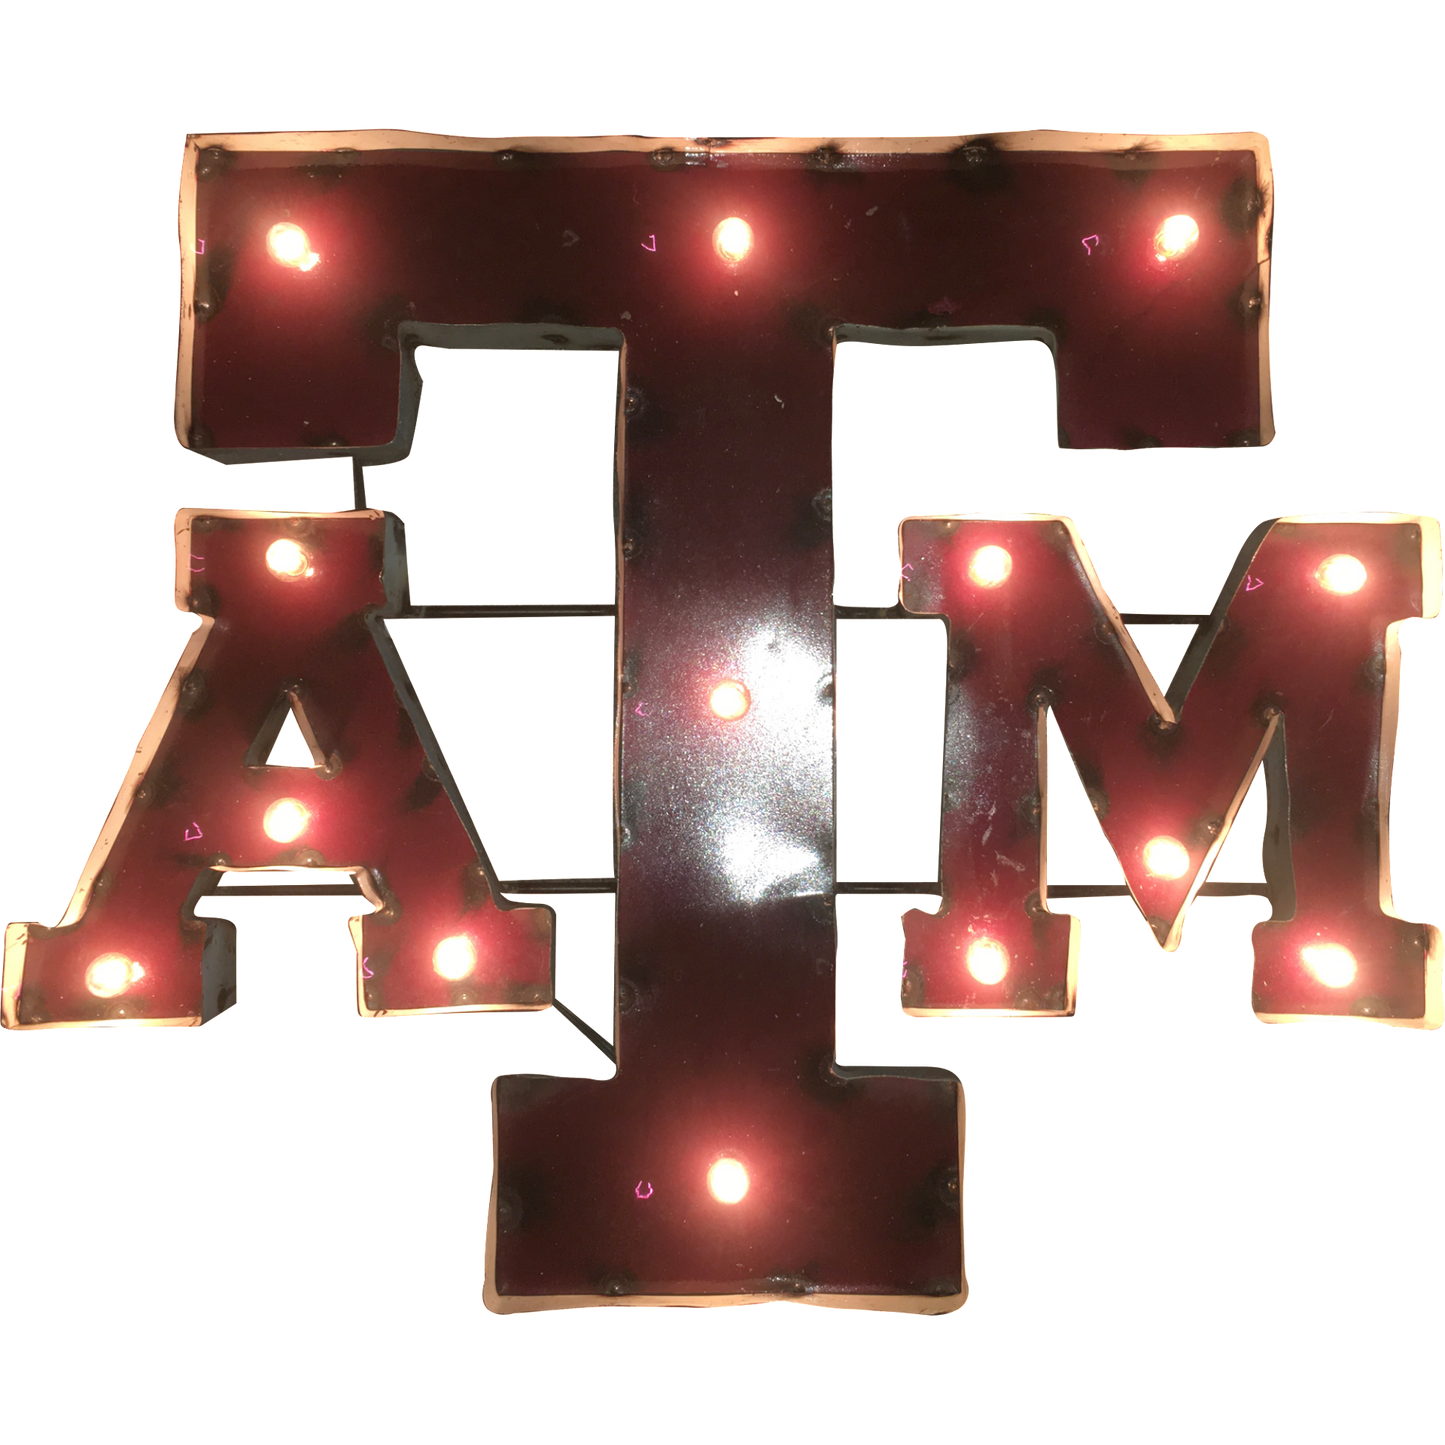 Texas A&M University Logo Lighted Recycled Metal Wall Decor